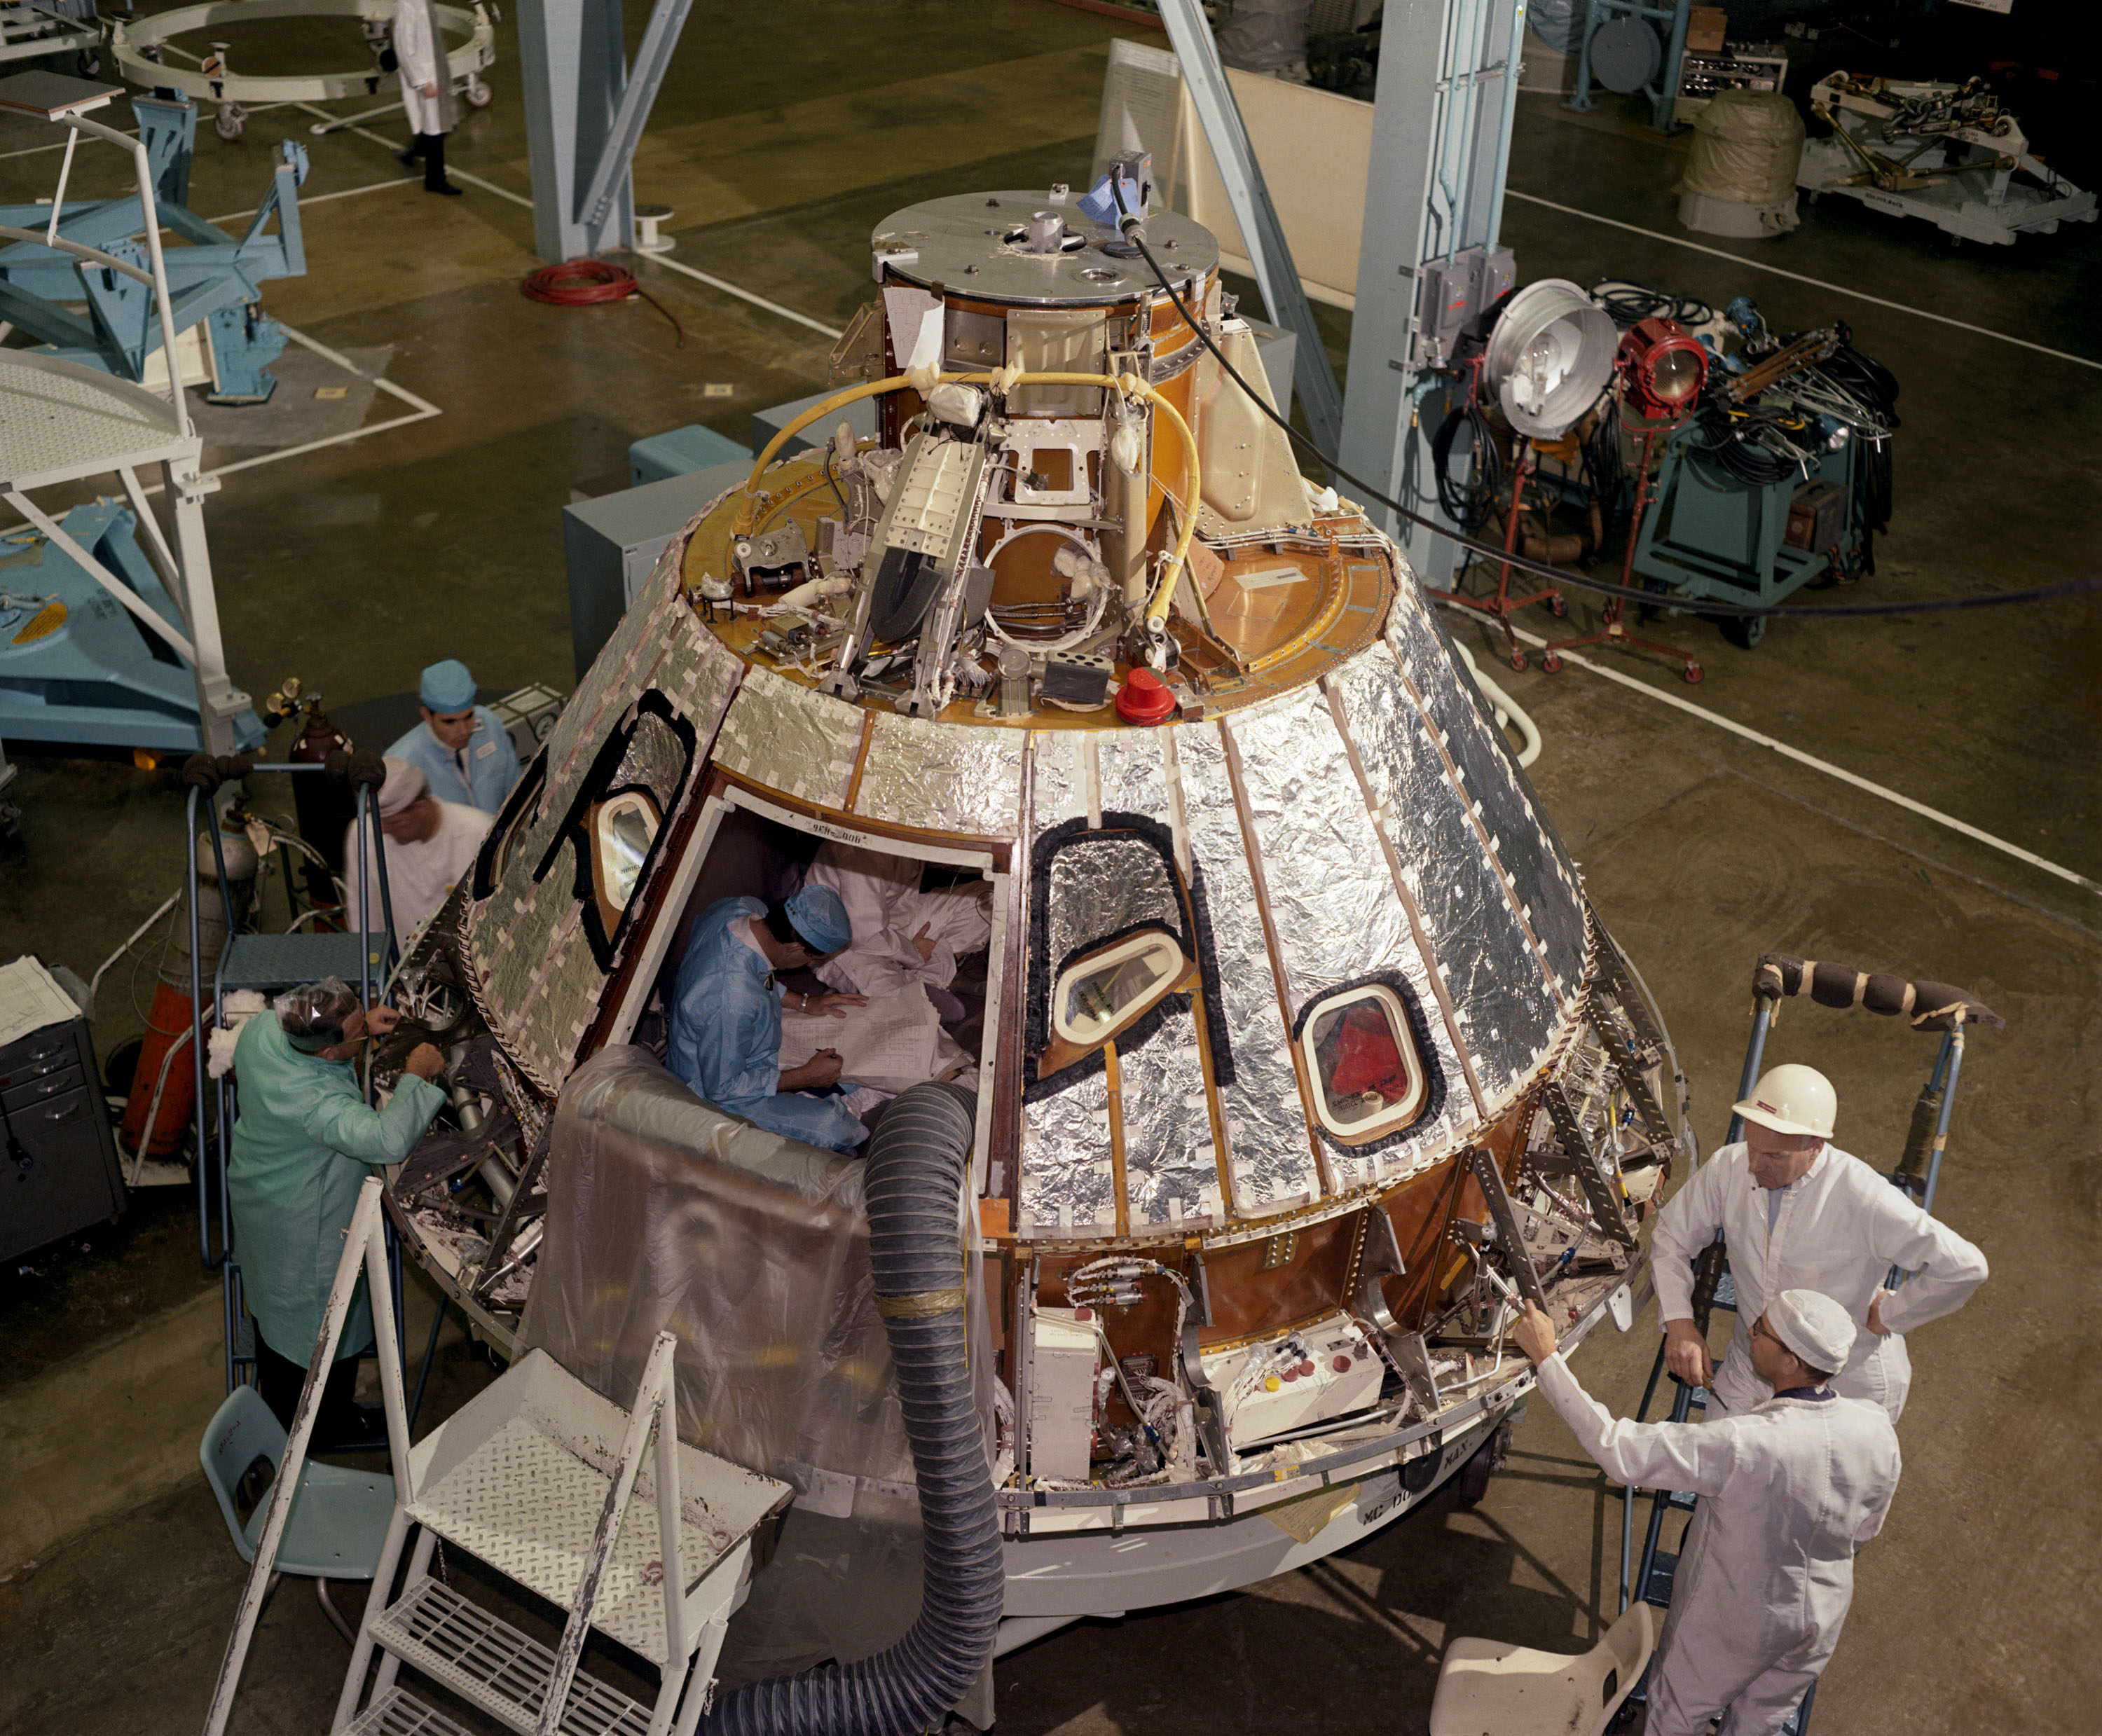 North American technicians work inside the Block I Command Module during processing. This craft caused great concern to Apollo 1 Commander Virgil "Gus" Grissom, who followed its progress with mounting distress and anger. Photo Credit: NASA